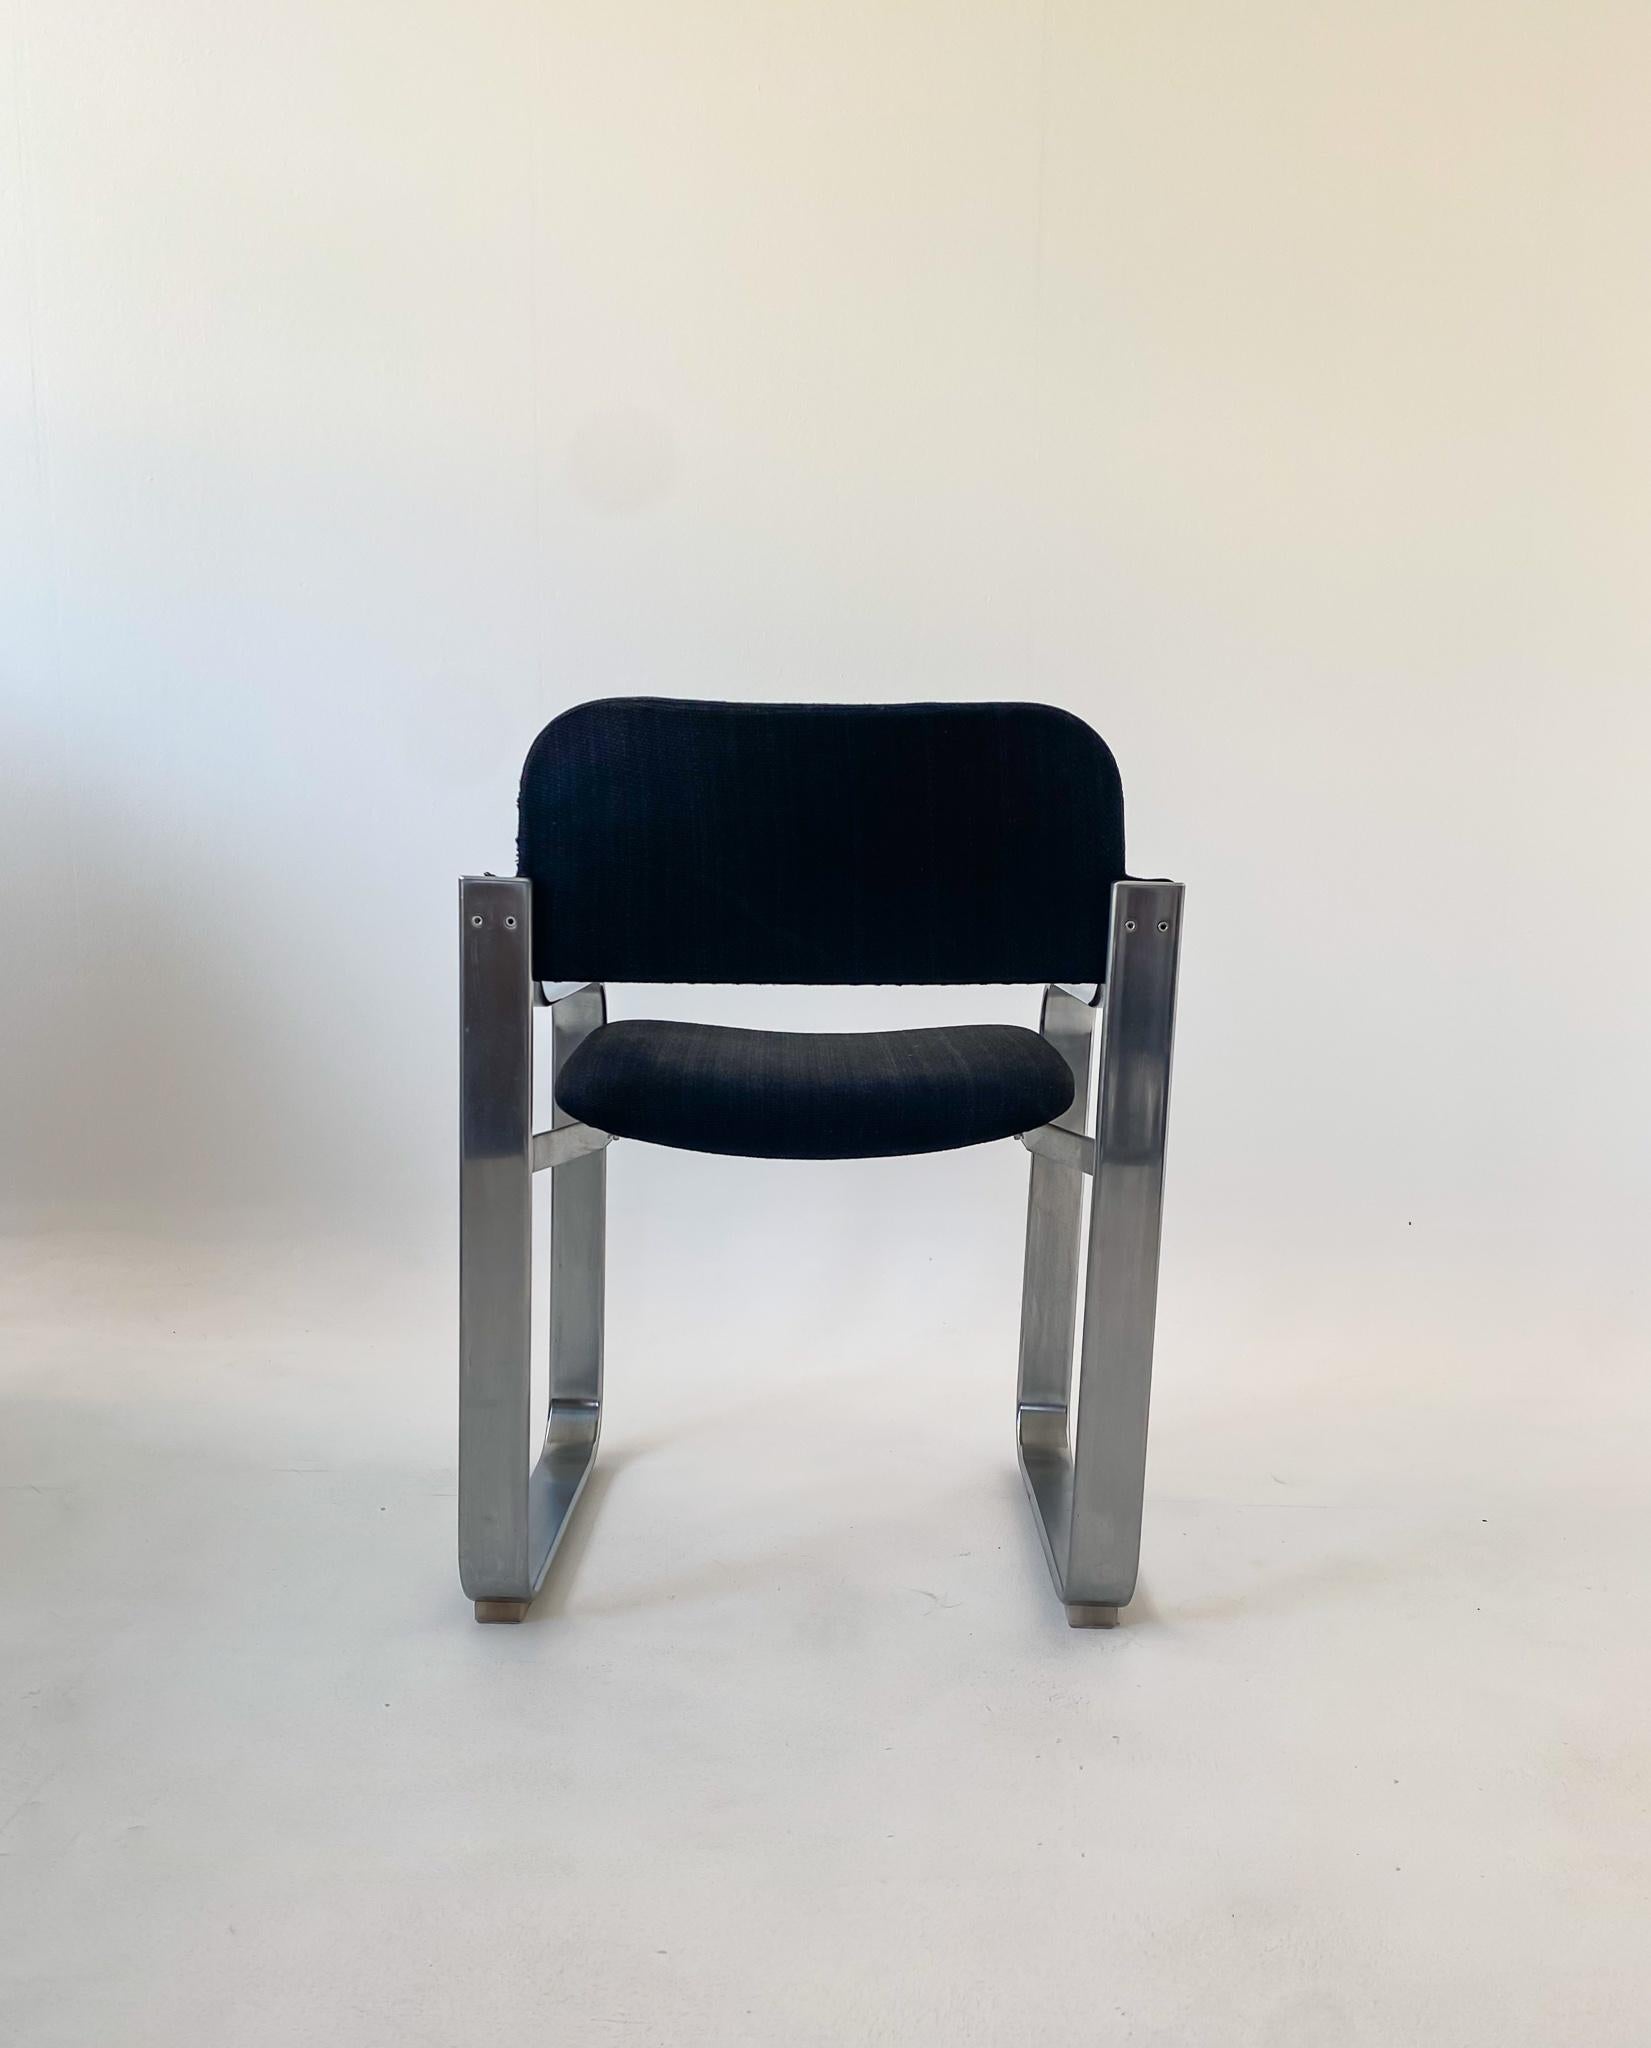 Late 20th Century Mid-Century Modern Black Metal Armchair by Eero Aarnio for Mobile Italia, 1970s For Sale